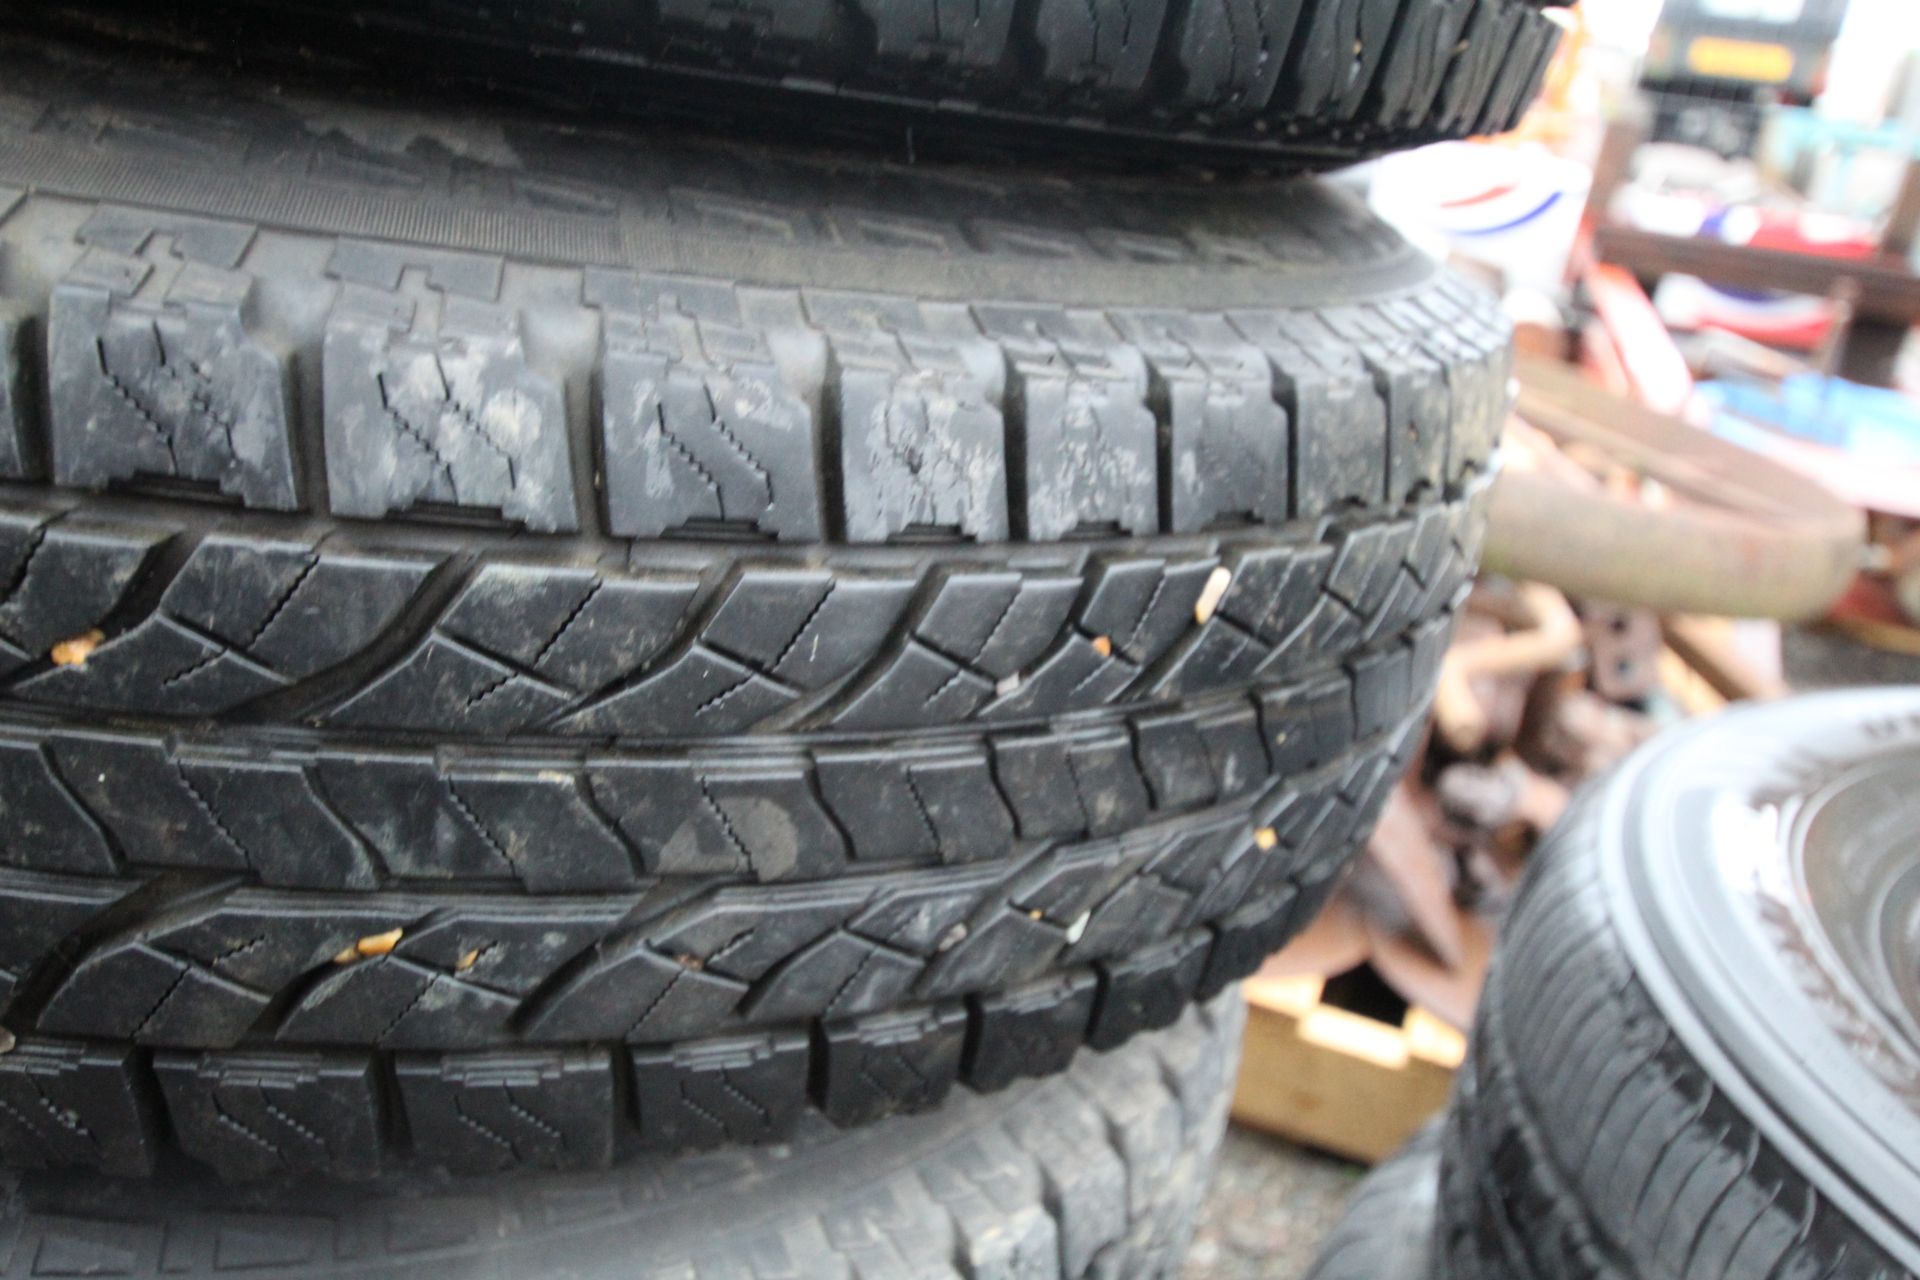 4x Land Rover wheels and tyres. - Image 5 of 7